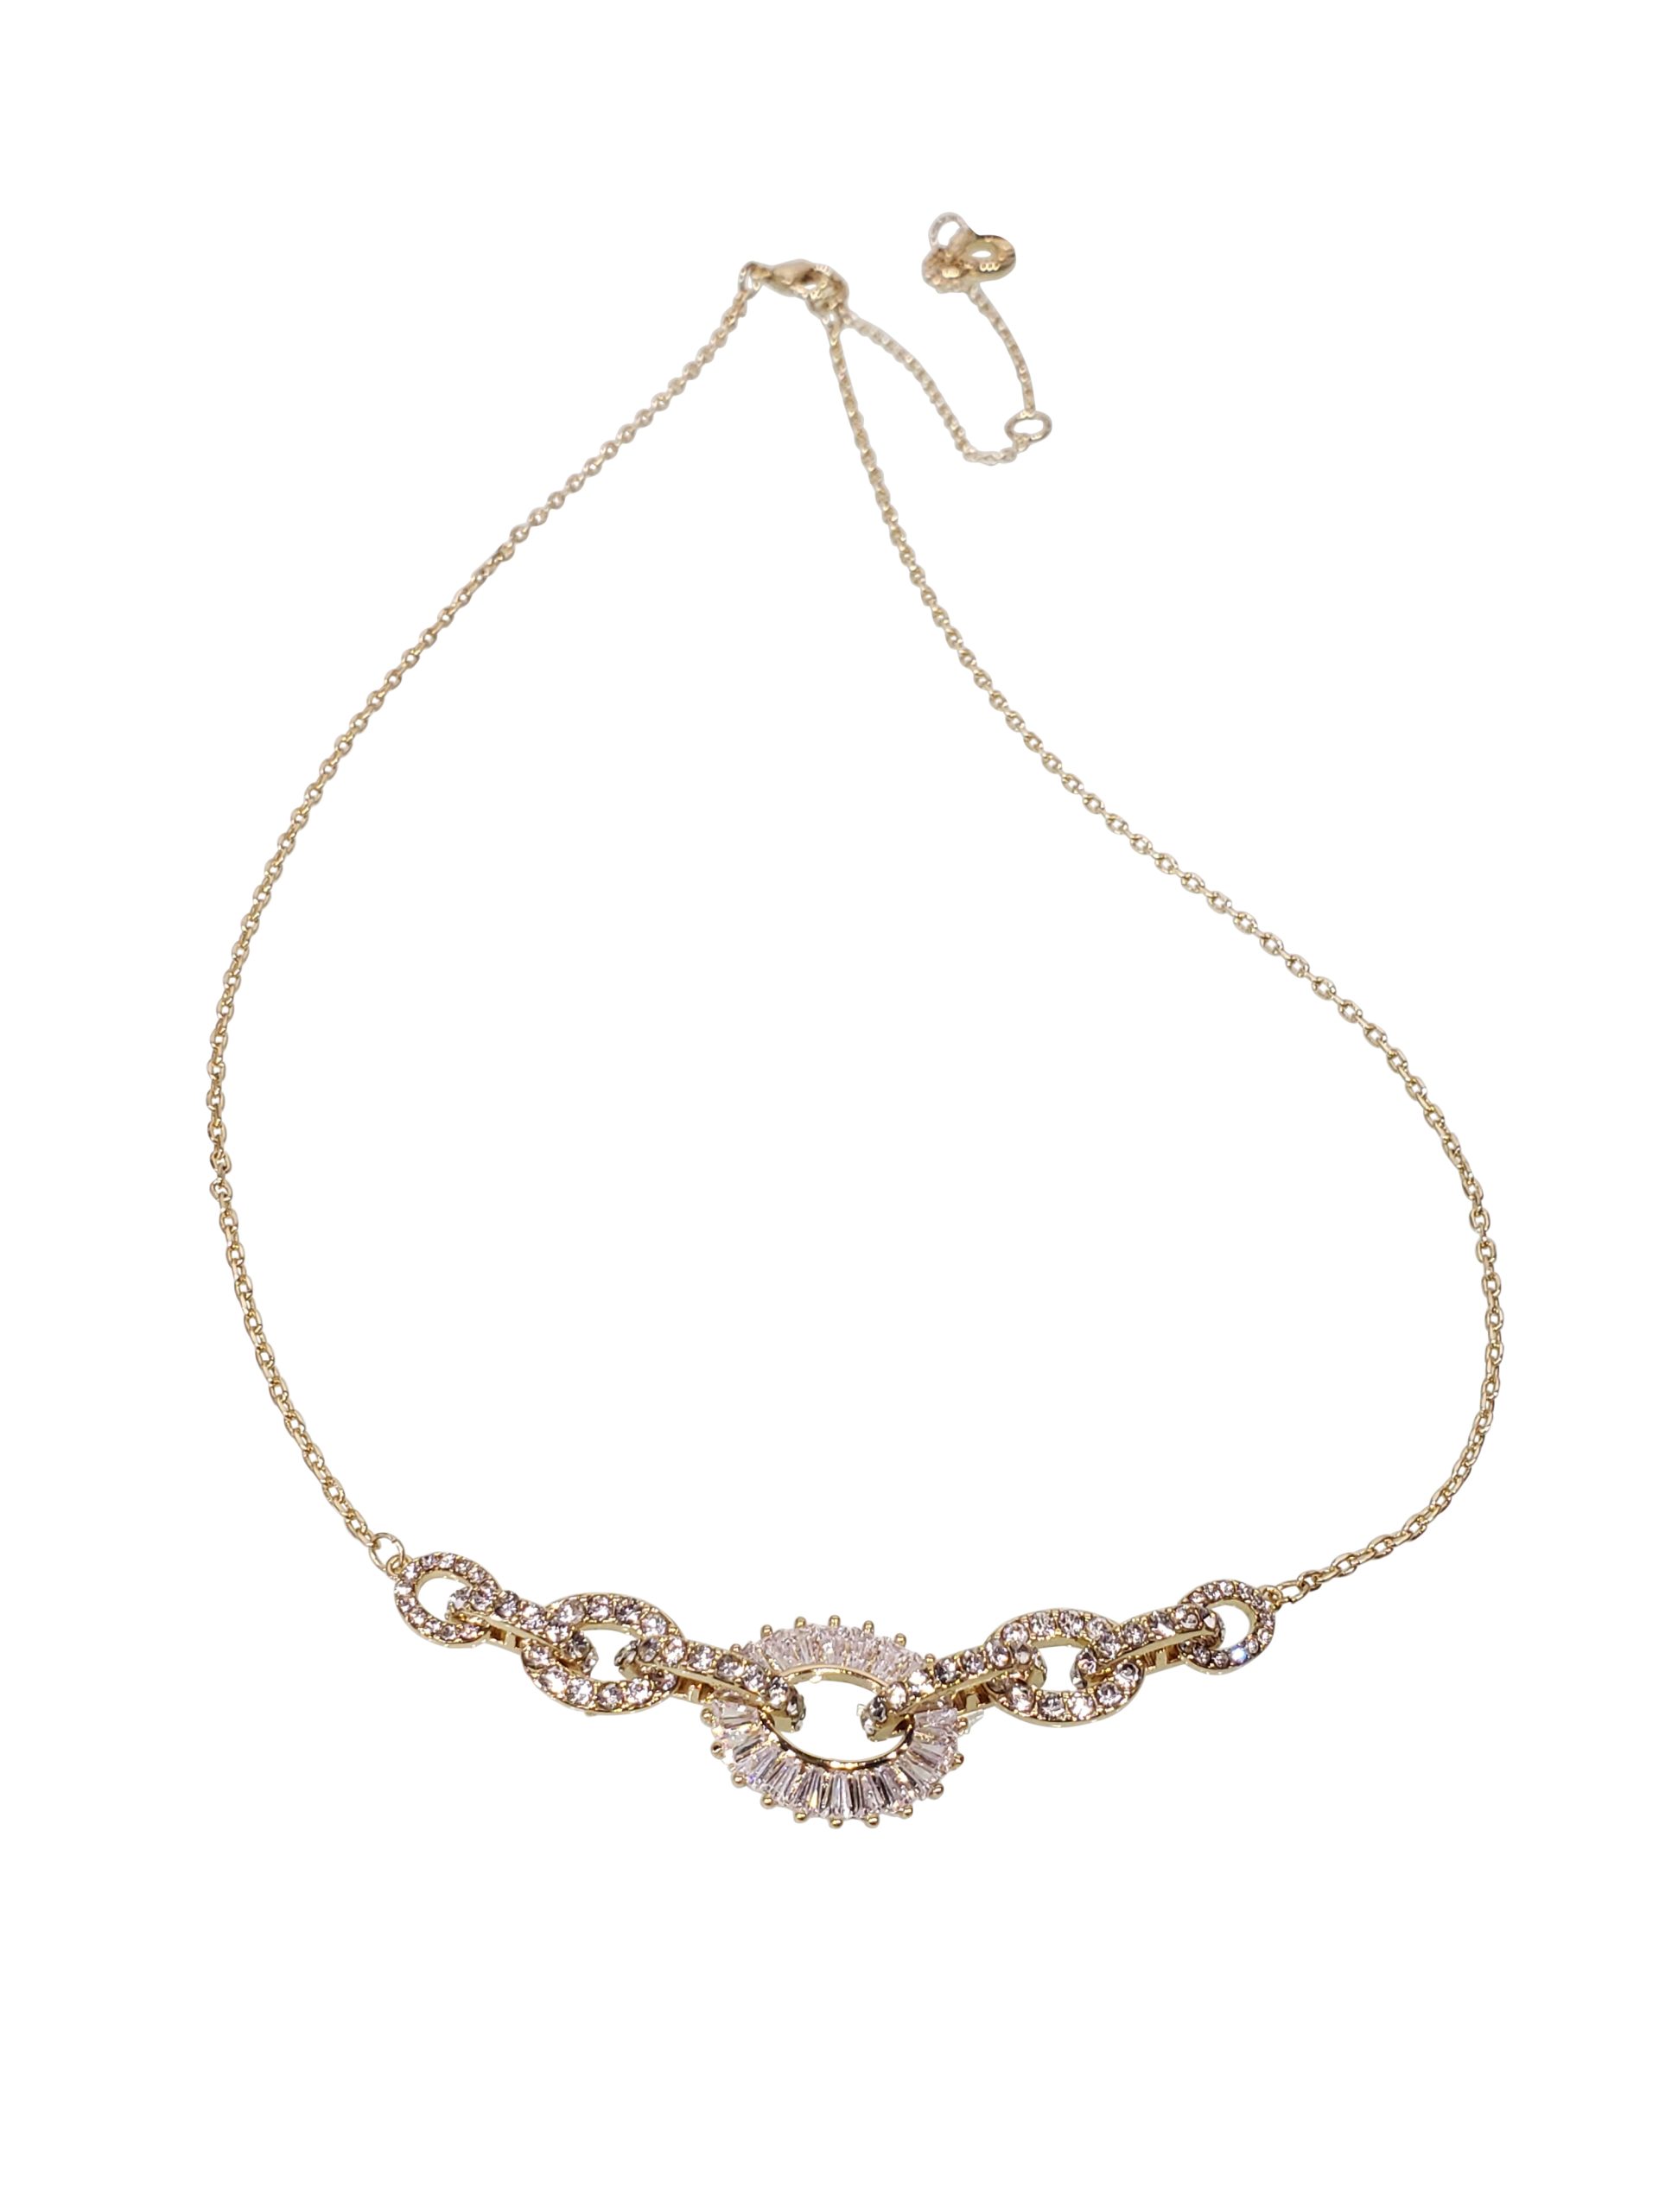 Pave/Baguette Link Frontal Necklace - Aarya's Exclusive